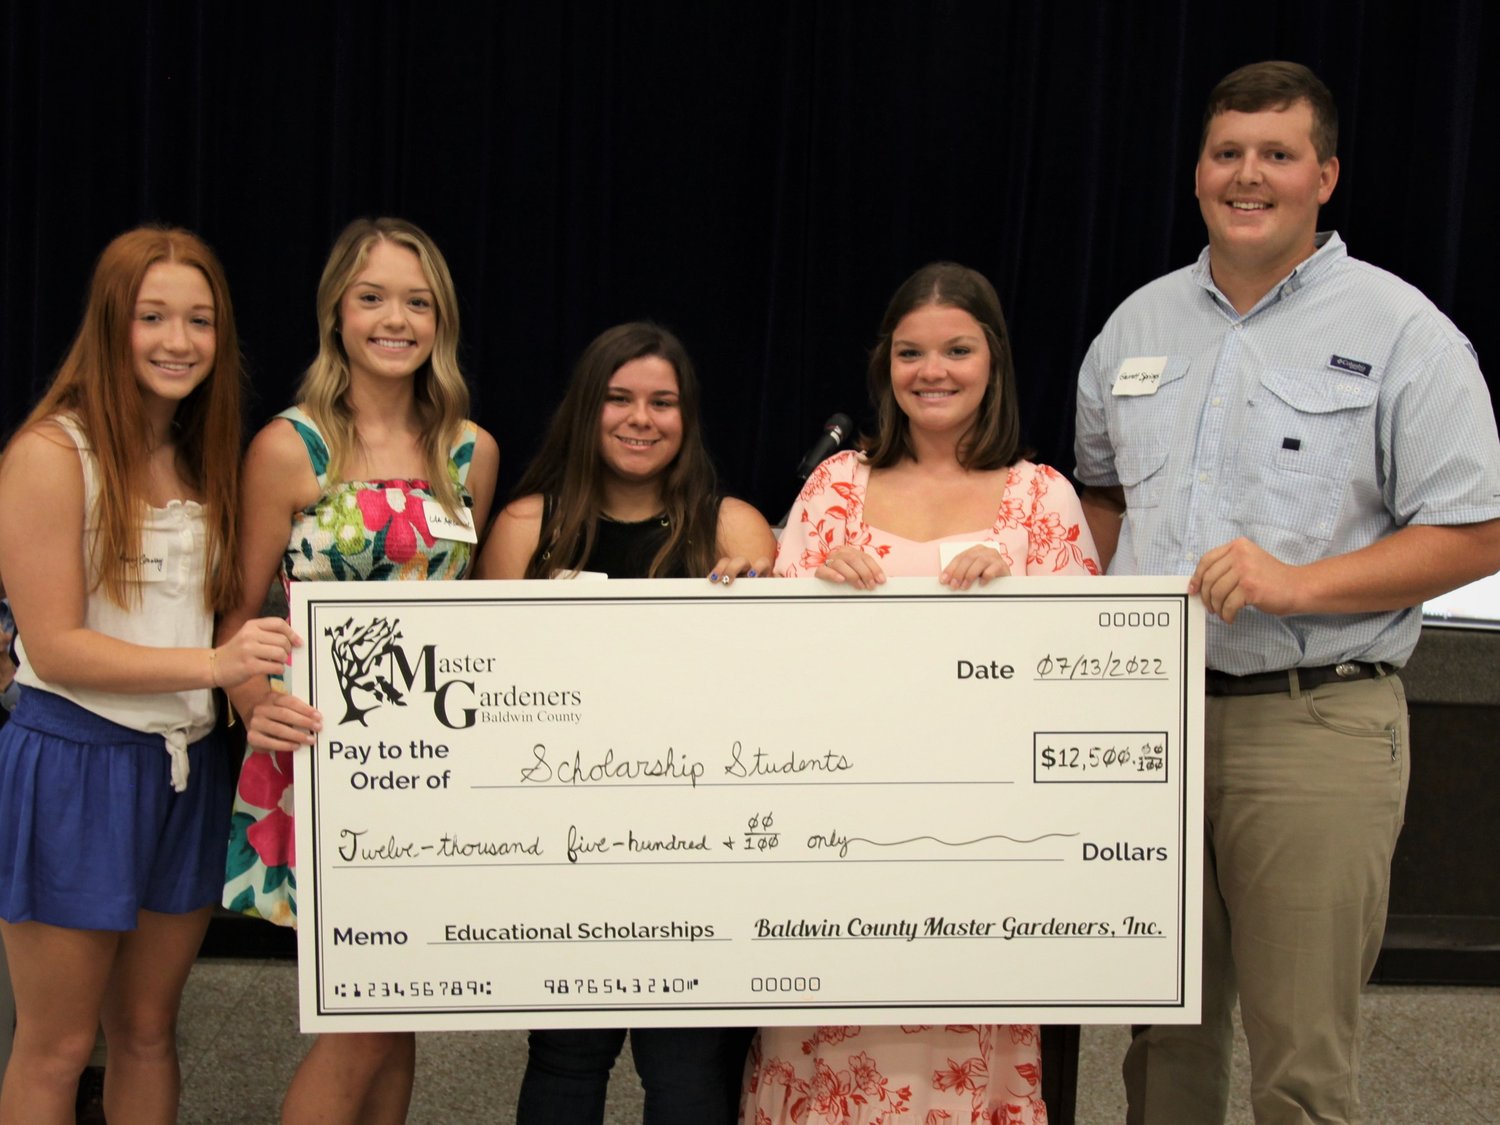 Recipients of the Baldwin County Master Gardeners scholarship, pictured here, from left: Mary Conway, Alison McDaniel, Vivian Mendez, Aven Brasher and Garrett Springs. Not pictured, Colton Bostwick.